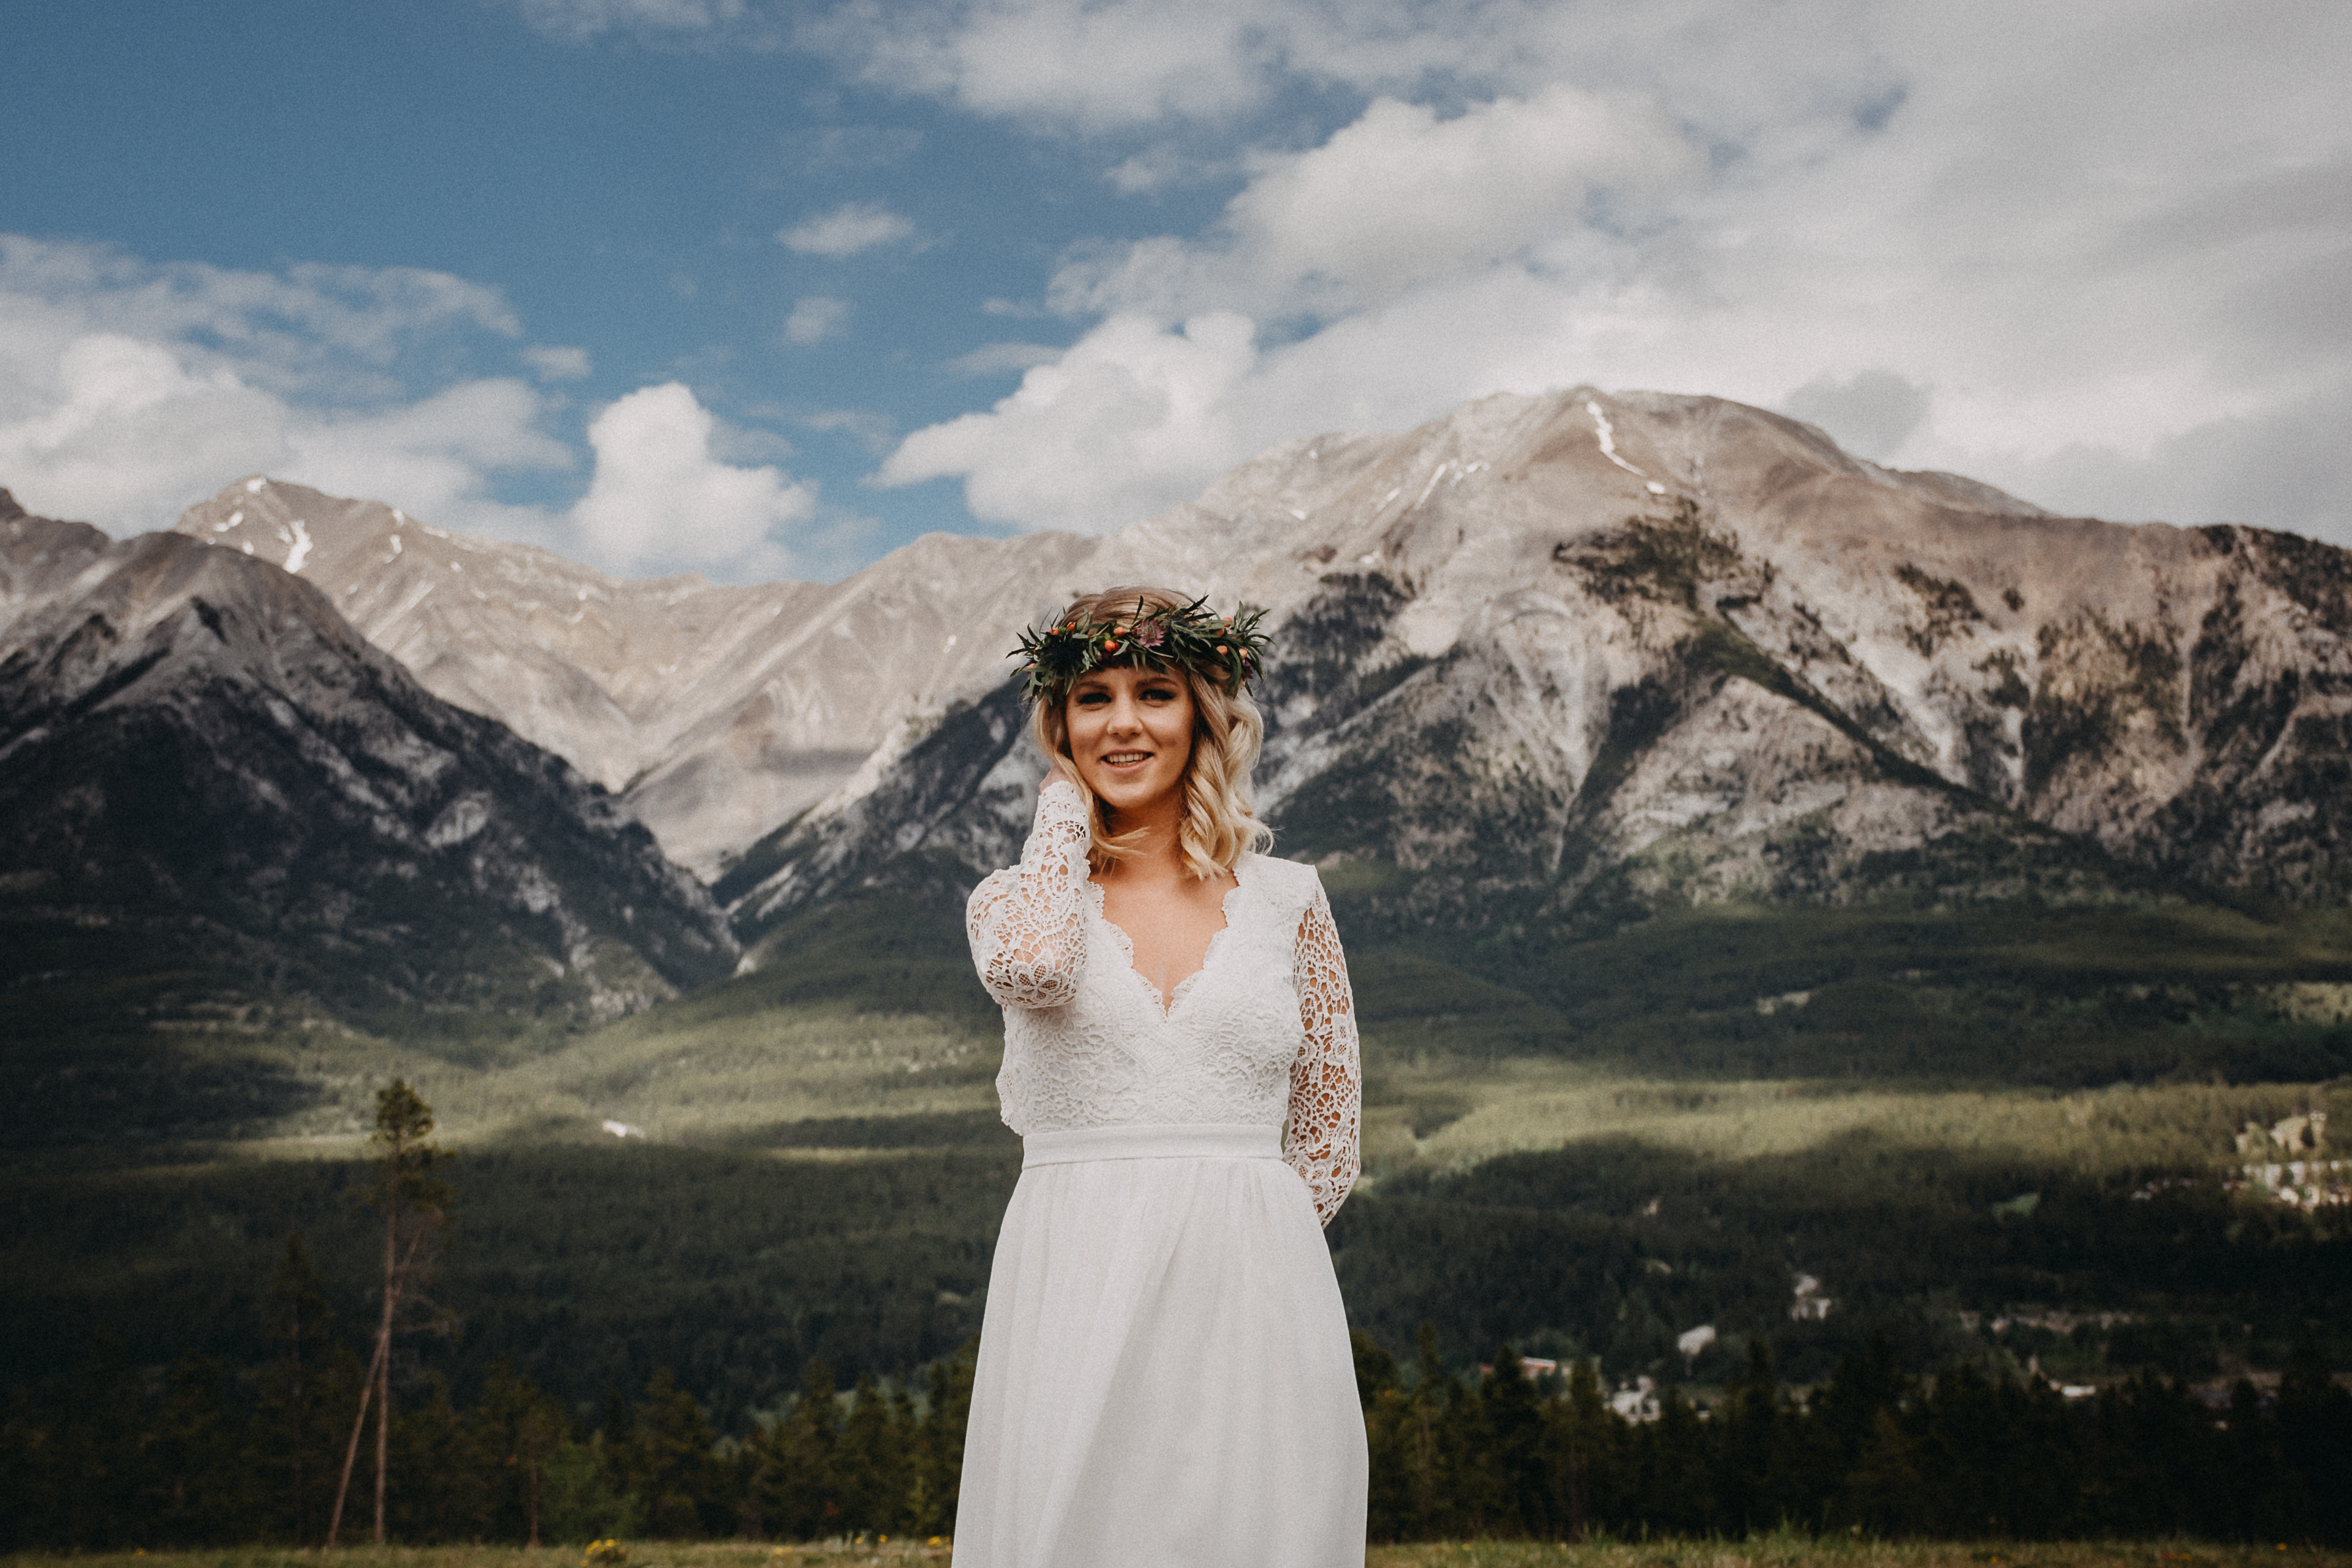 The bride posing in front of the rocky mountains